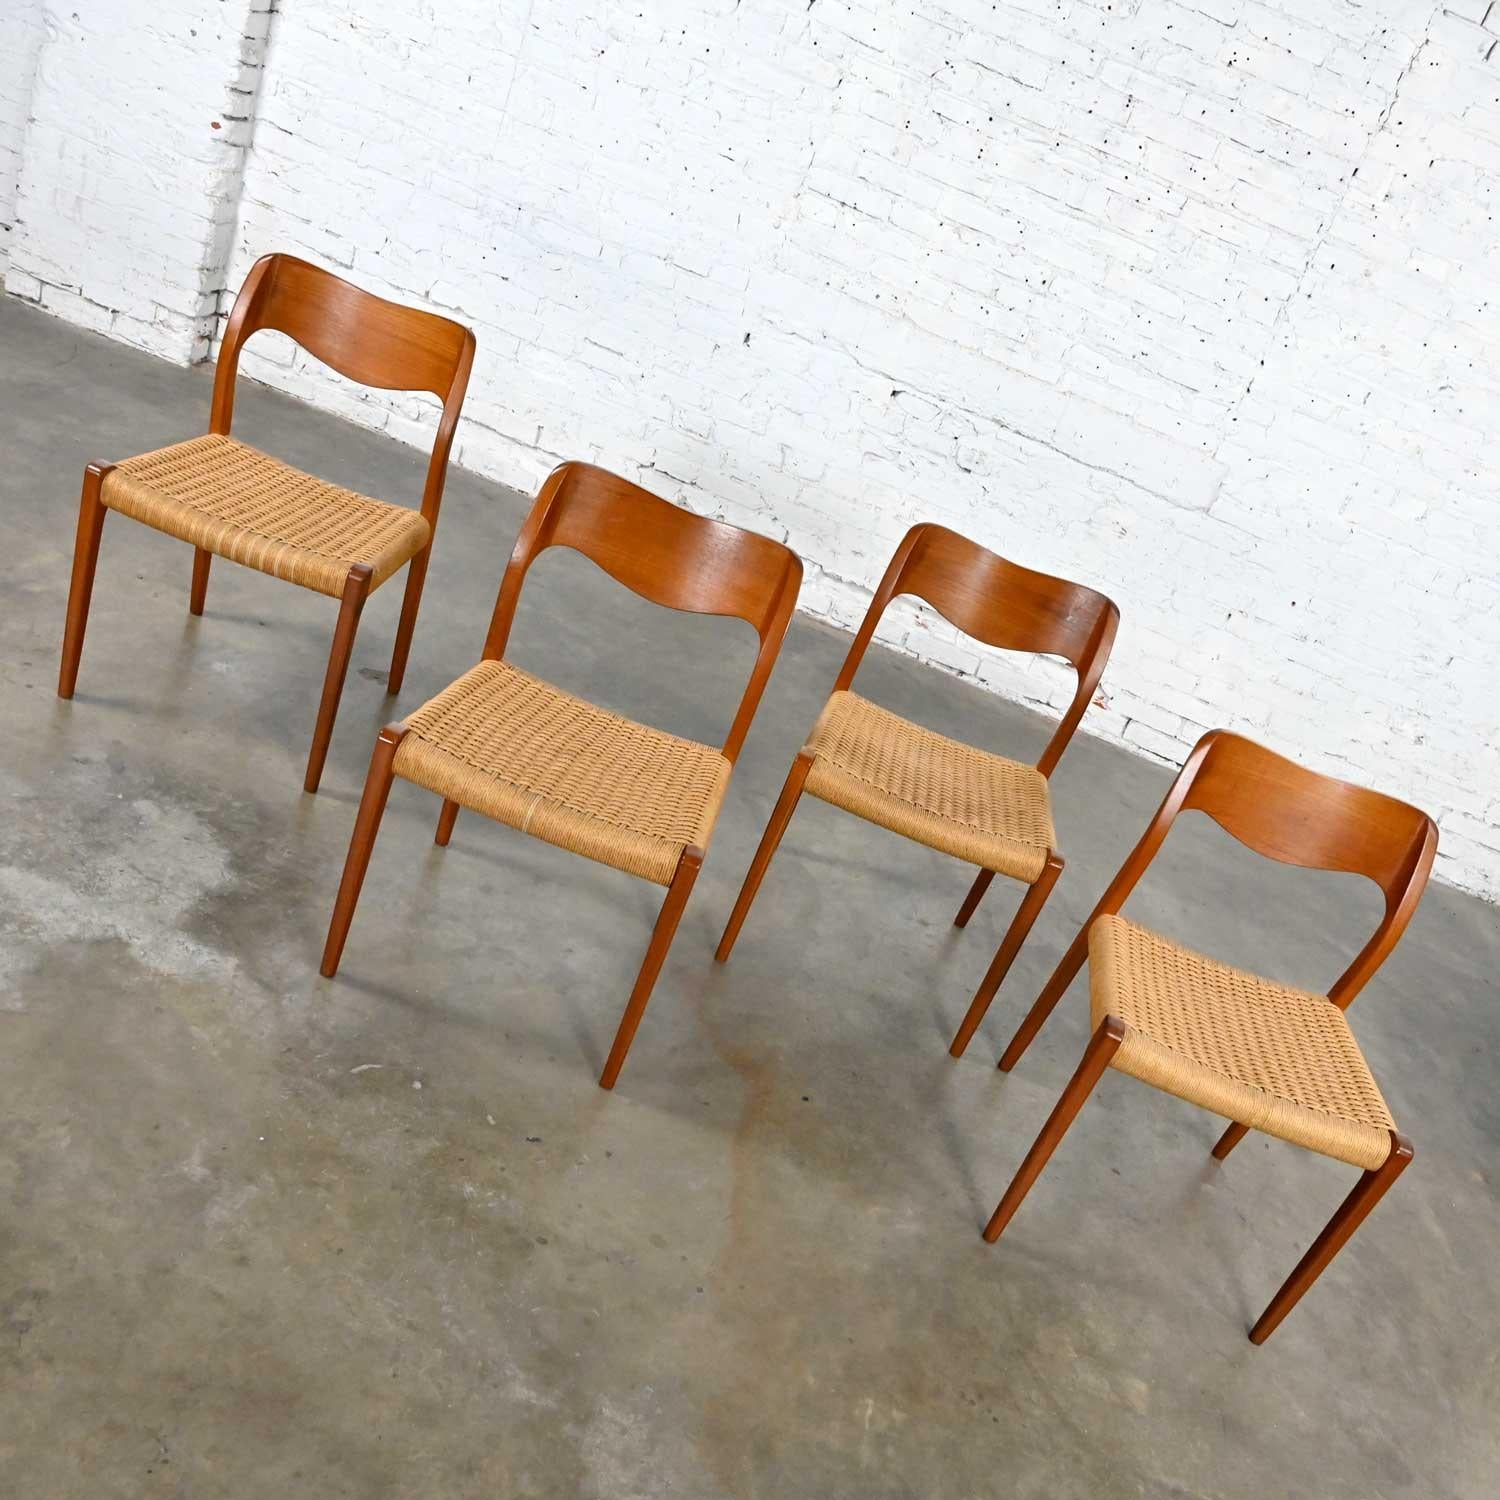 4 Neils O Moller Scandinavian Modern Model 71 Teak Dining Chairs by J.L. Mollers In Good Condition For Sale In Topeka, KS